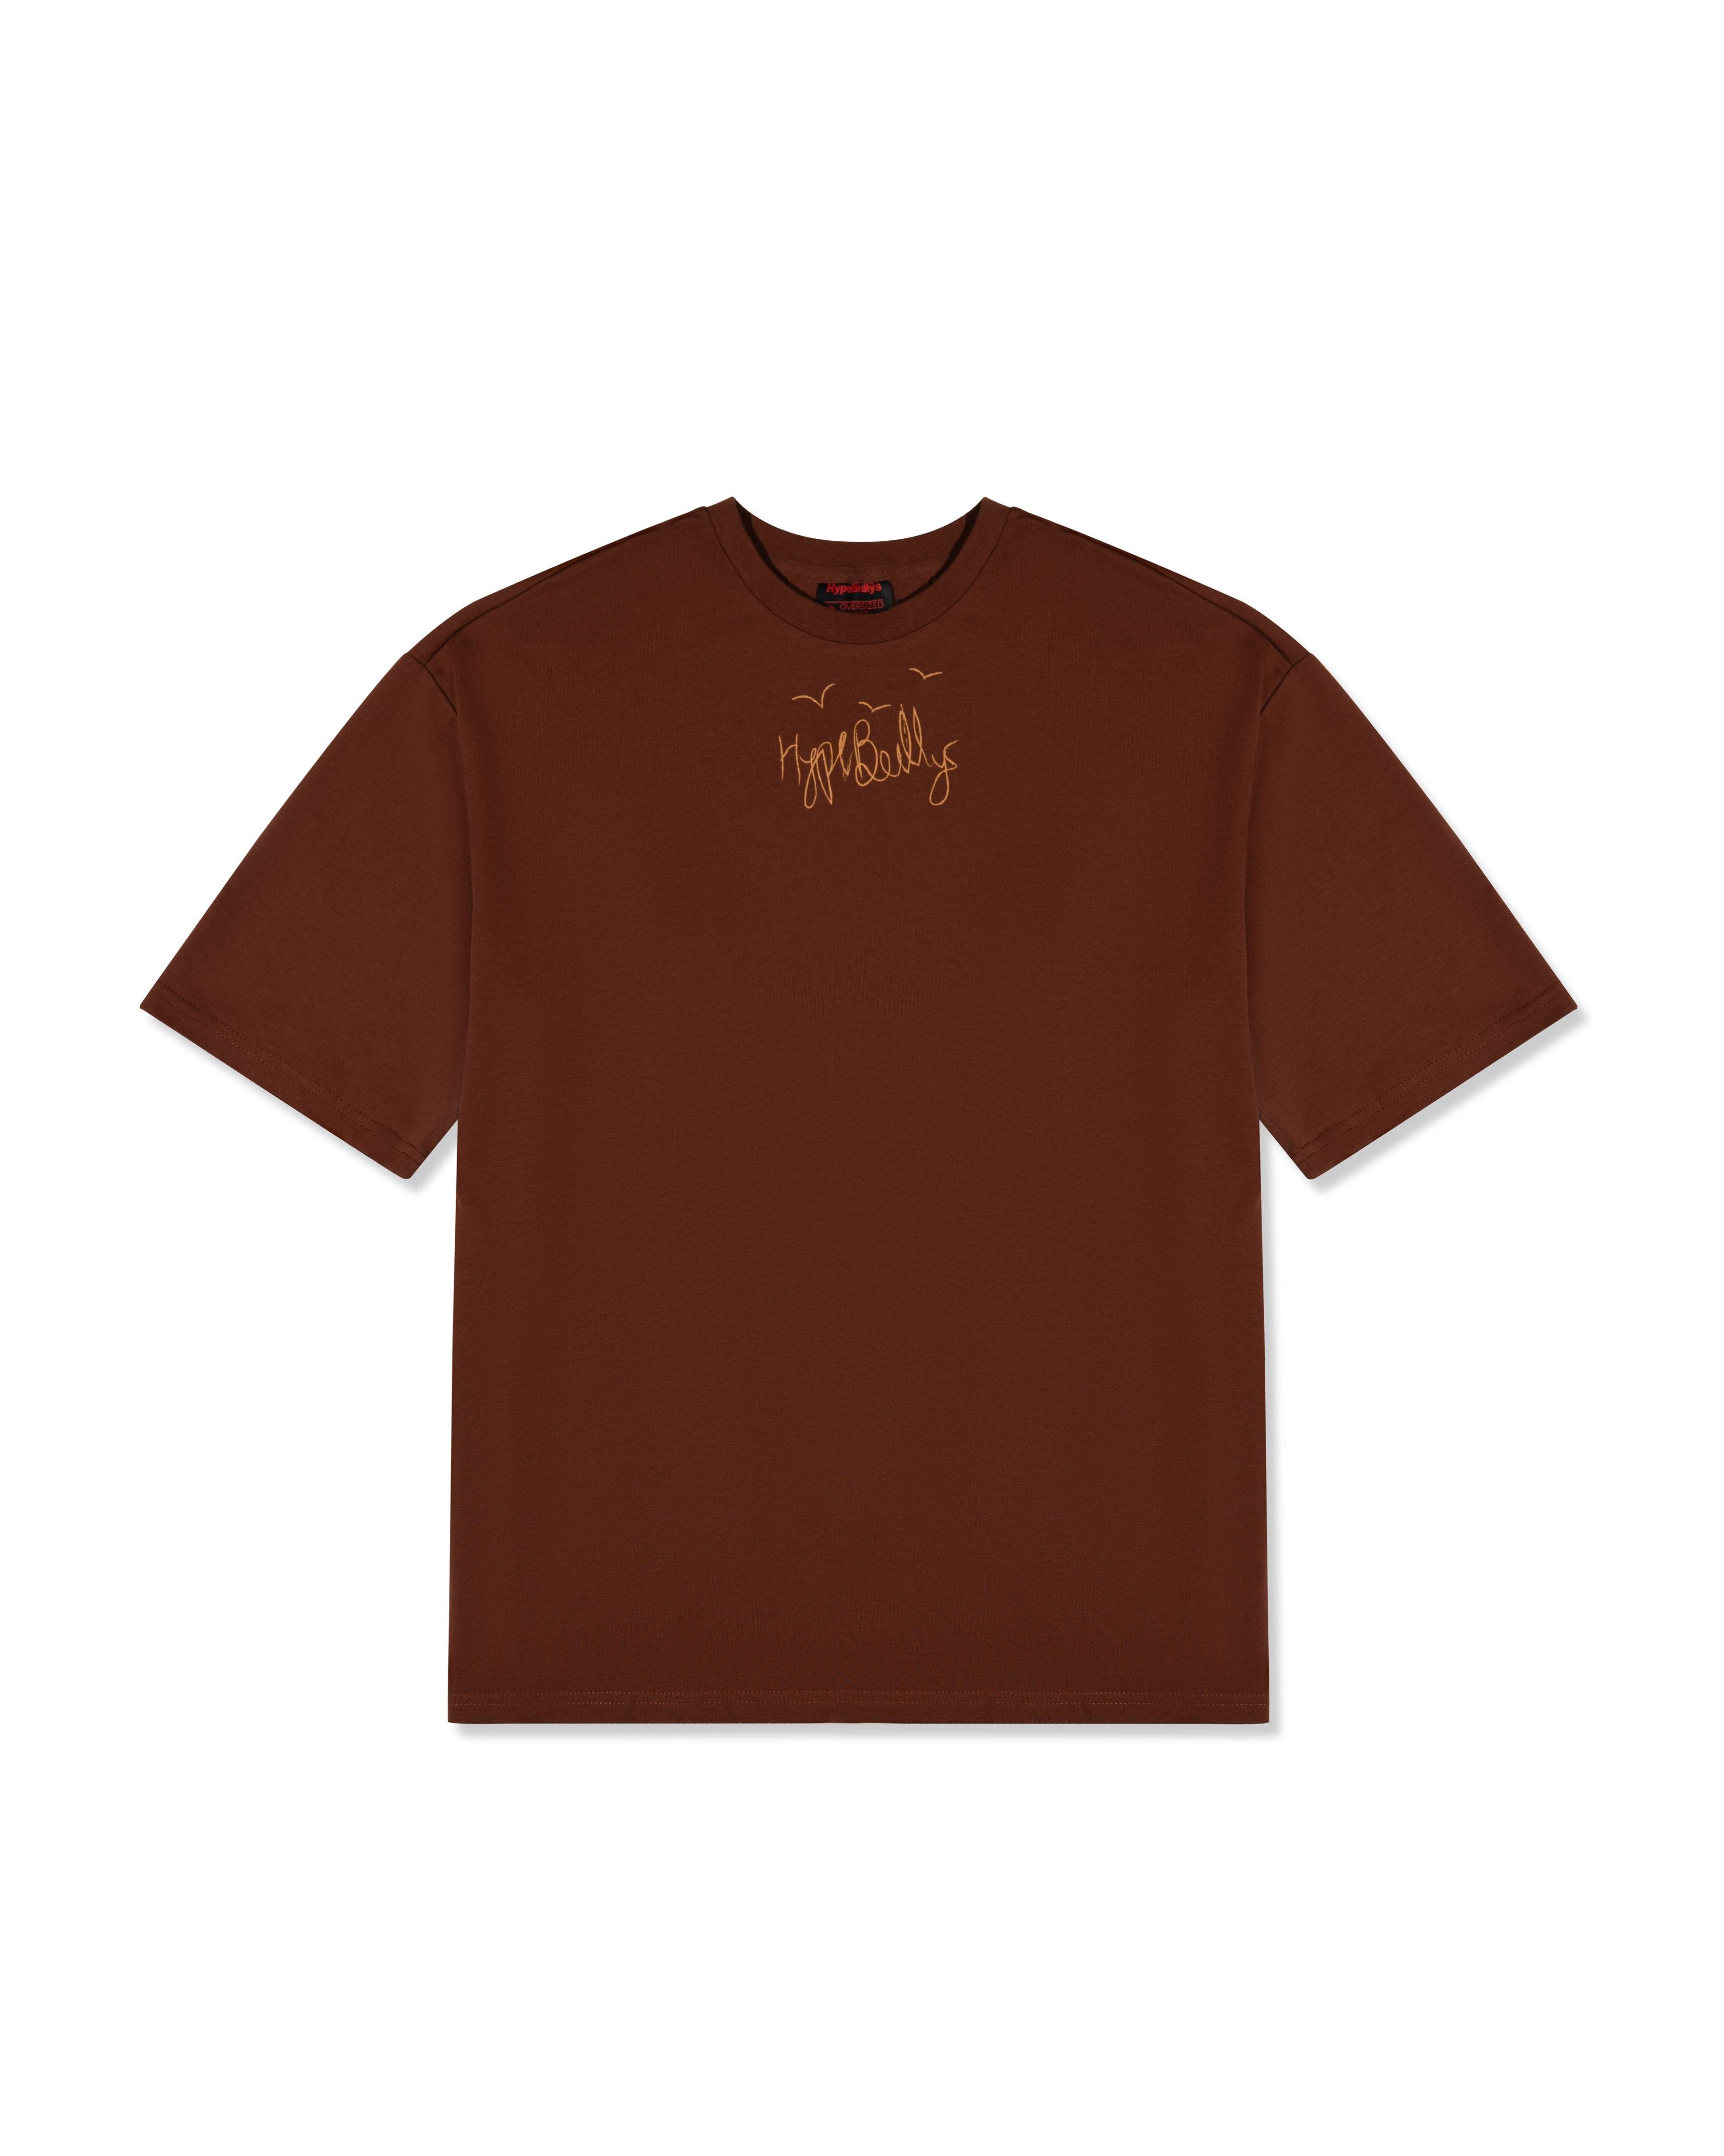 FlyBullys Cocoa Brown T-Shirt